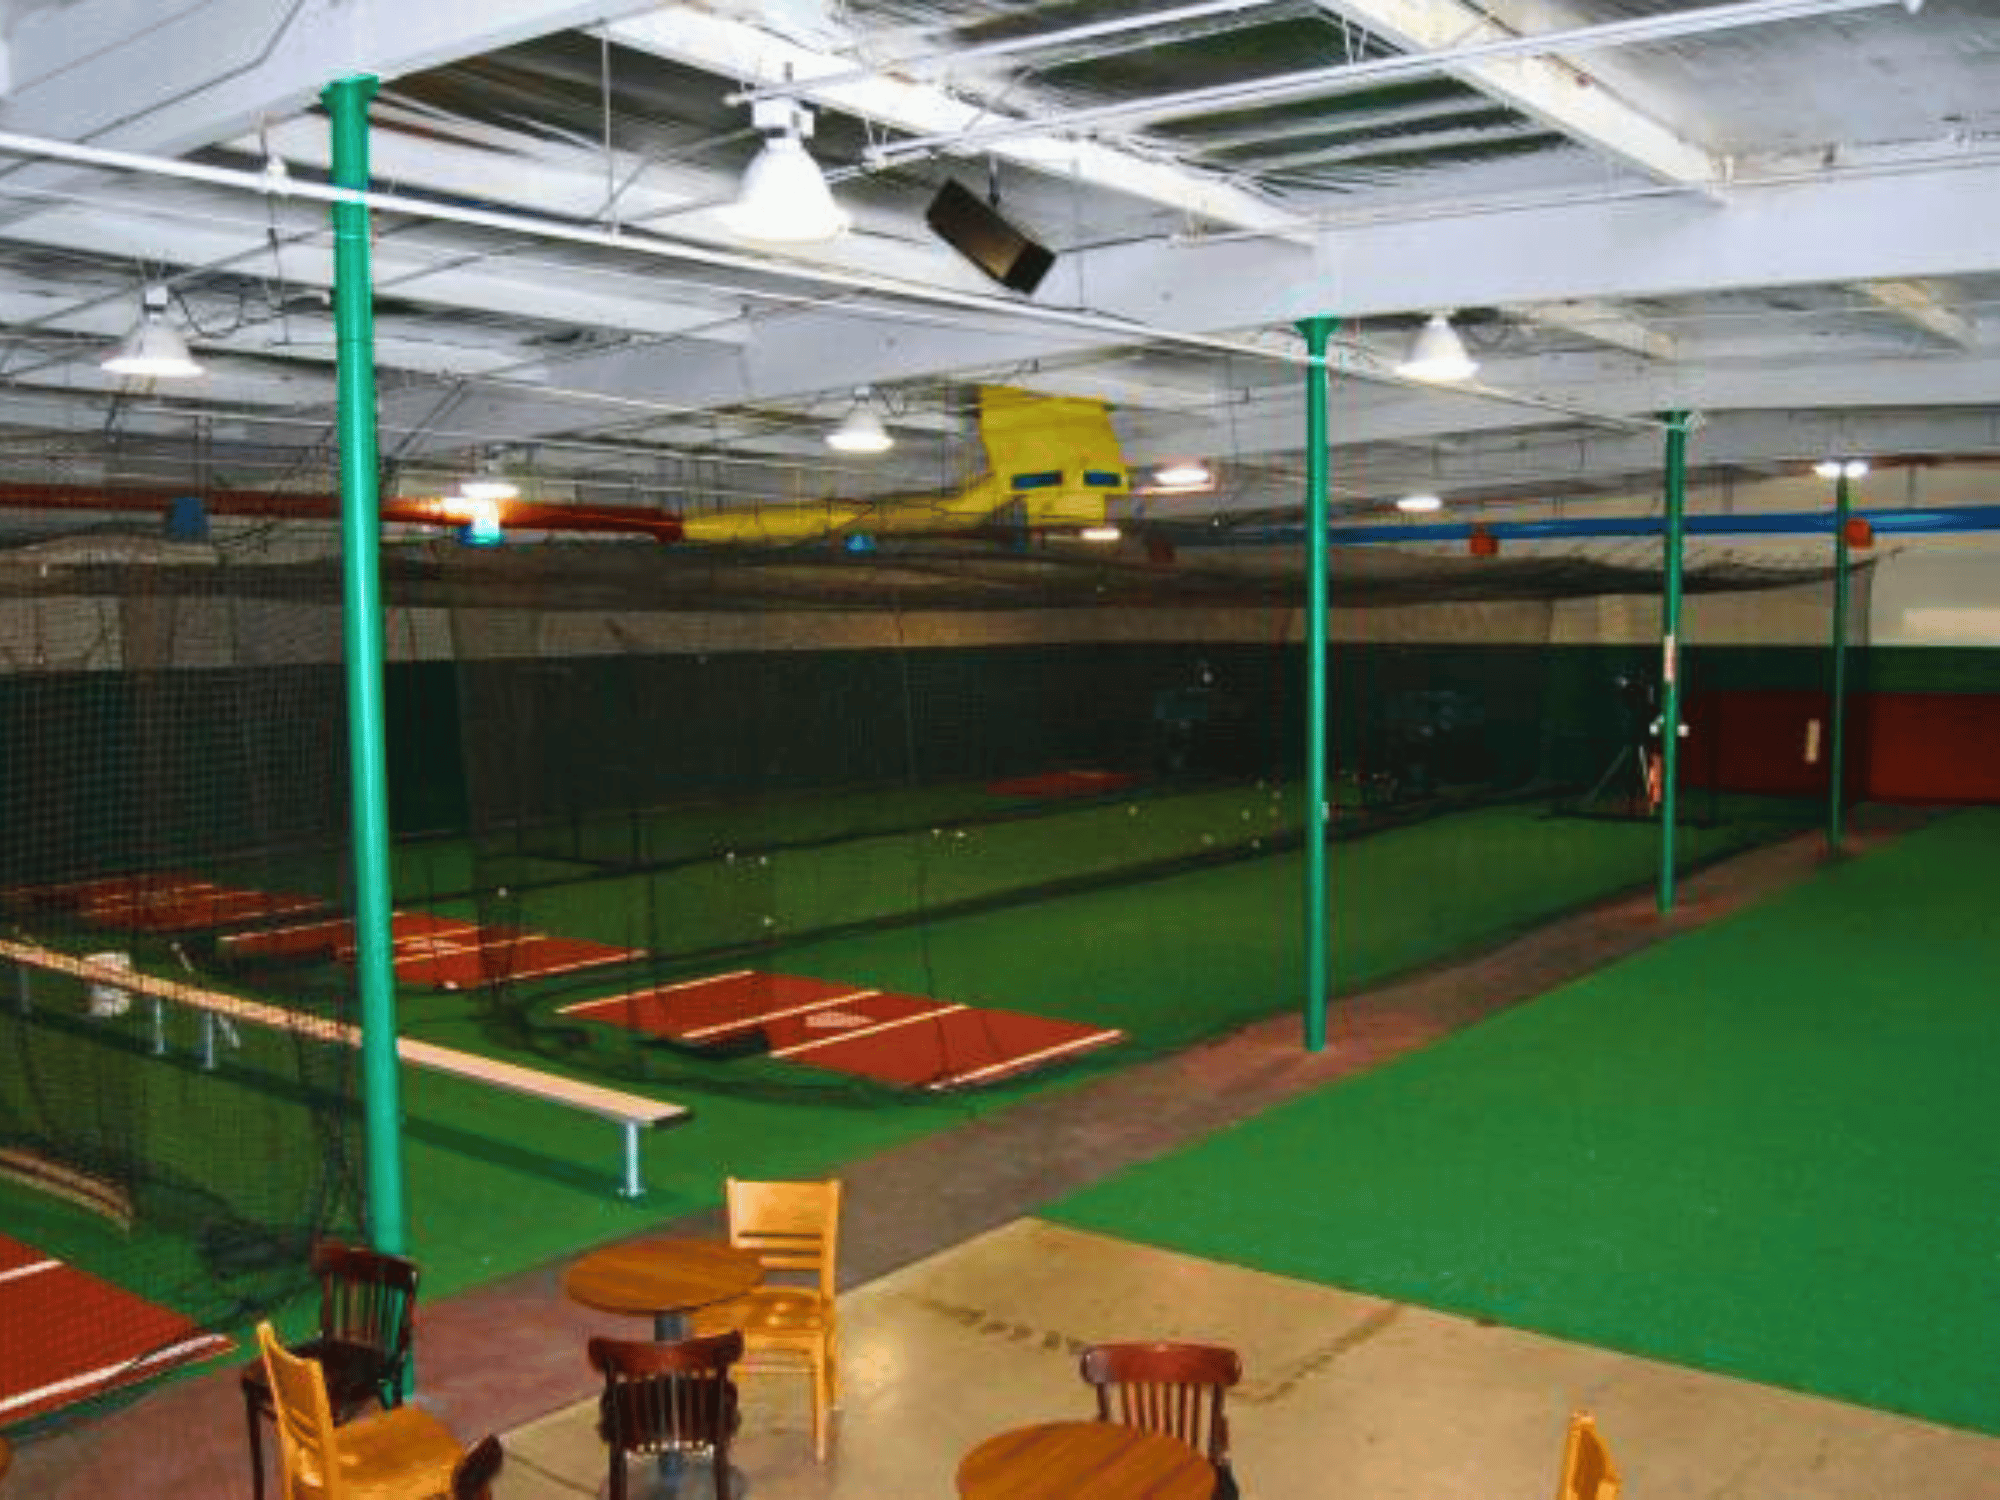 Indoor batting cage facility with three lanes and batters box mats